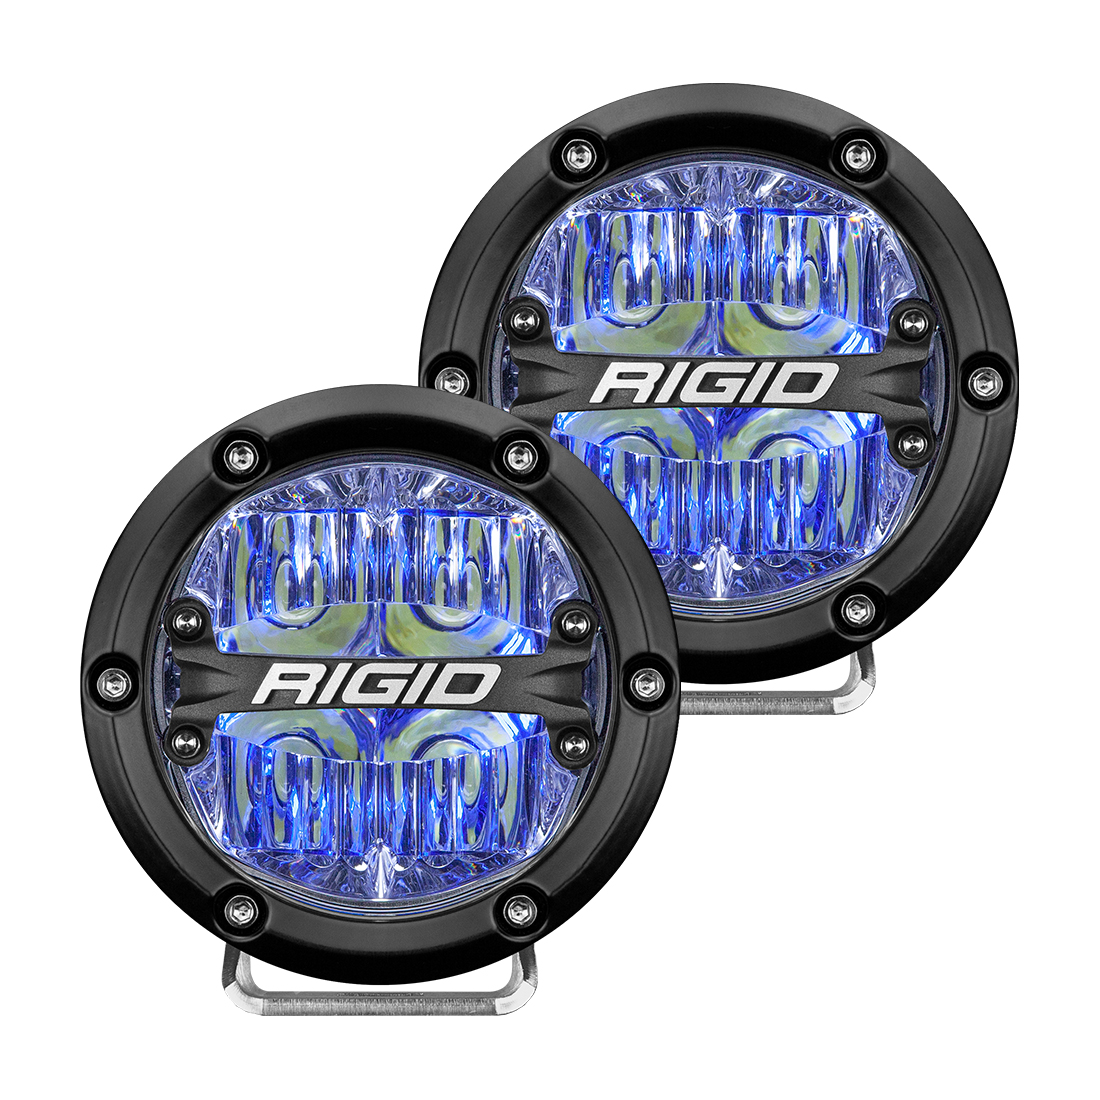 Rigid Industries 360-Series 4 Inch Led Off-Road Drive Beam Blue Backlight Pair